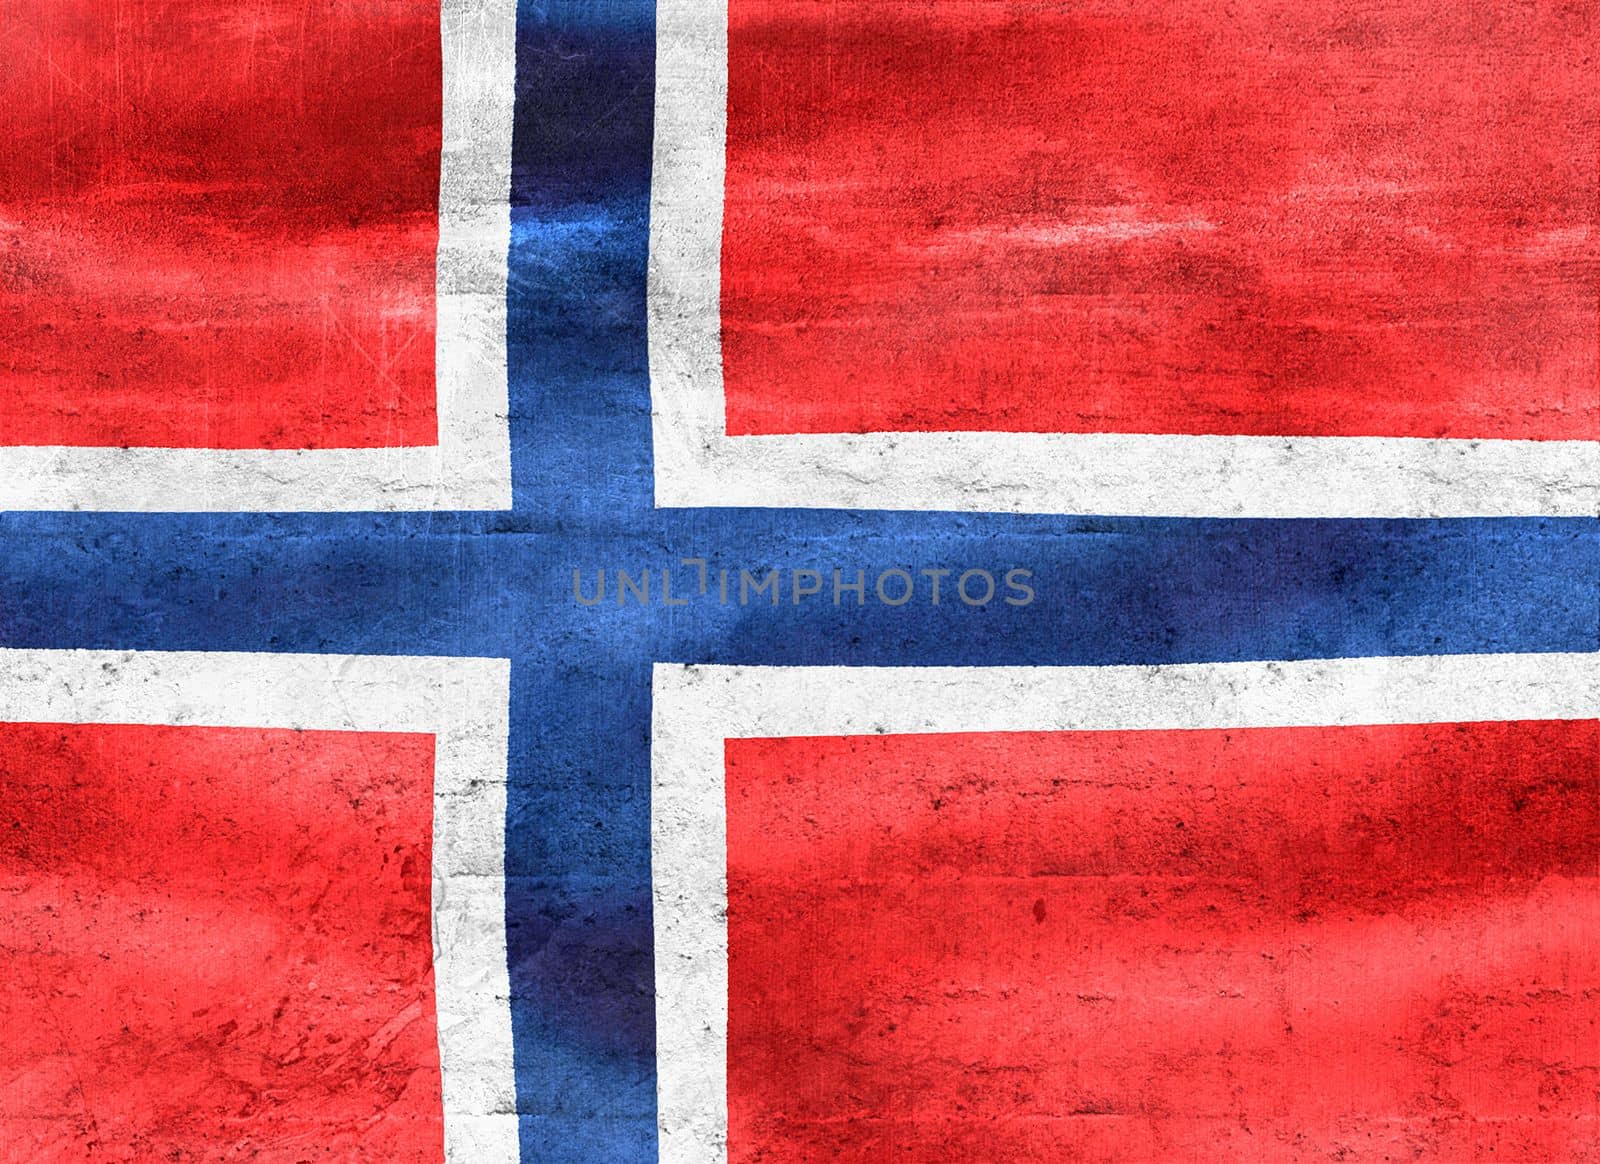 3D-Illustration of a Norway flag - realistic waving fabric flag by MP_foto71